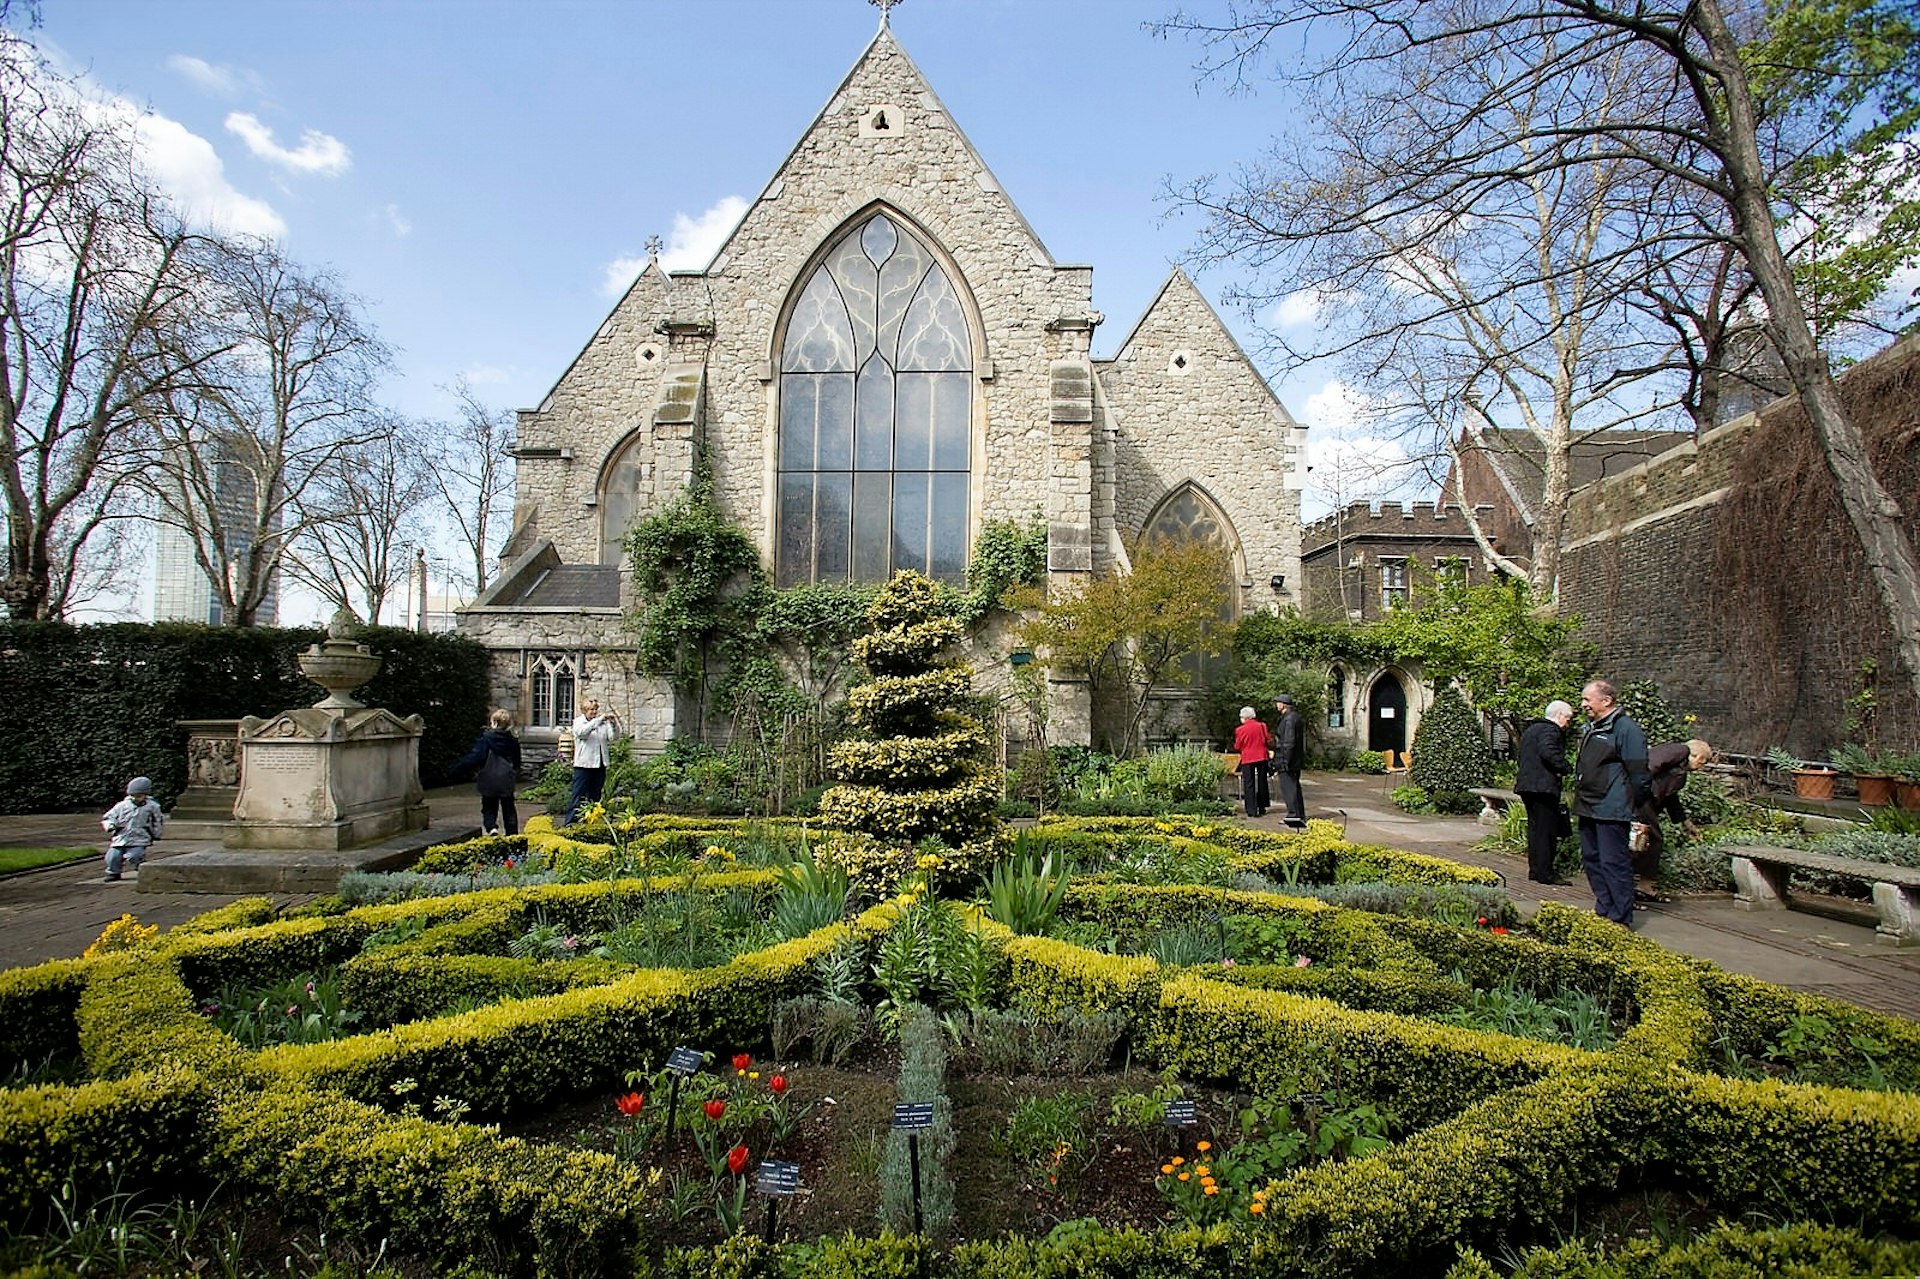 London's Garden Museum is housed in the disused church of St Mary-at-Lambeth